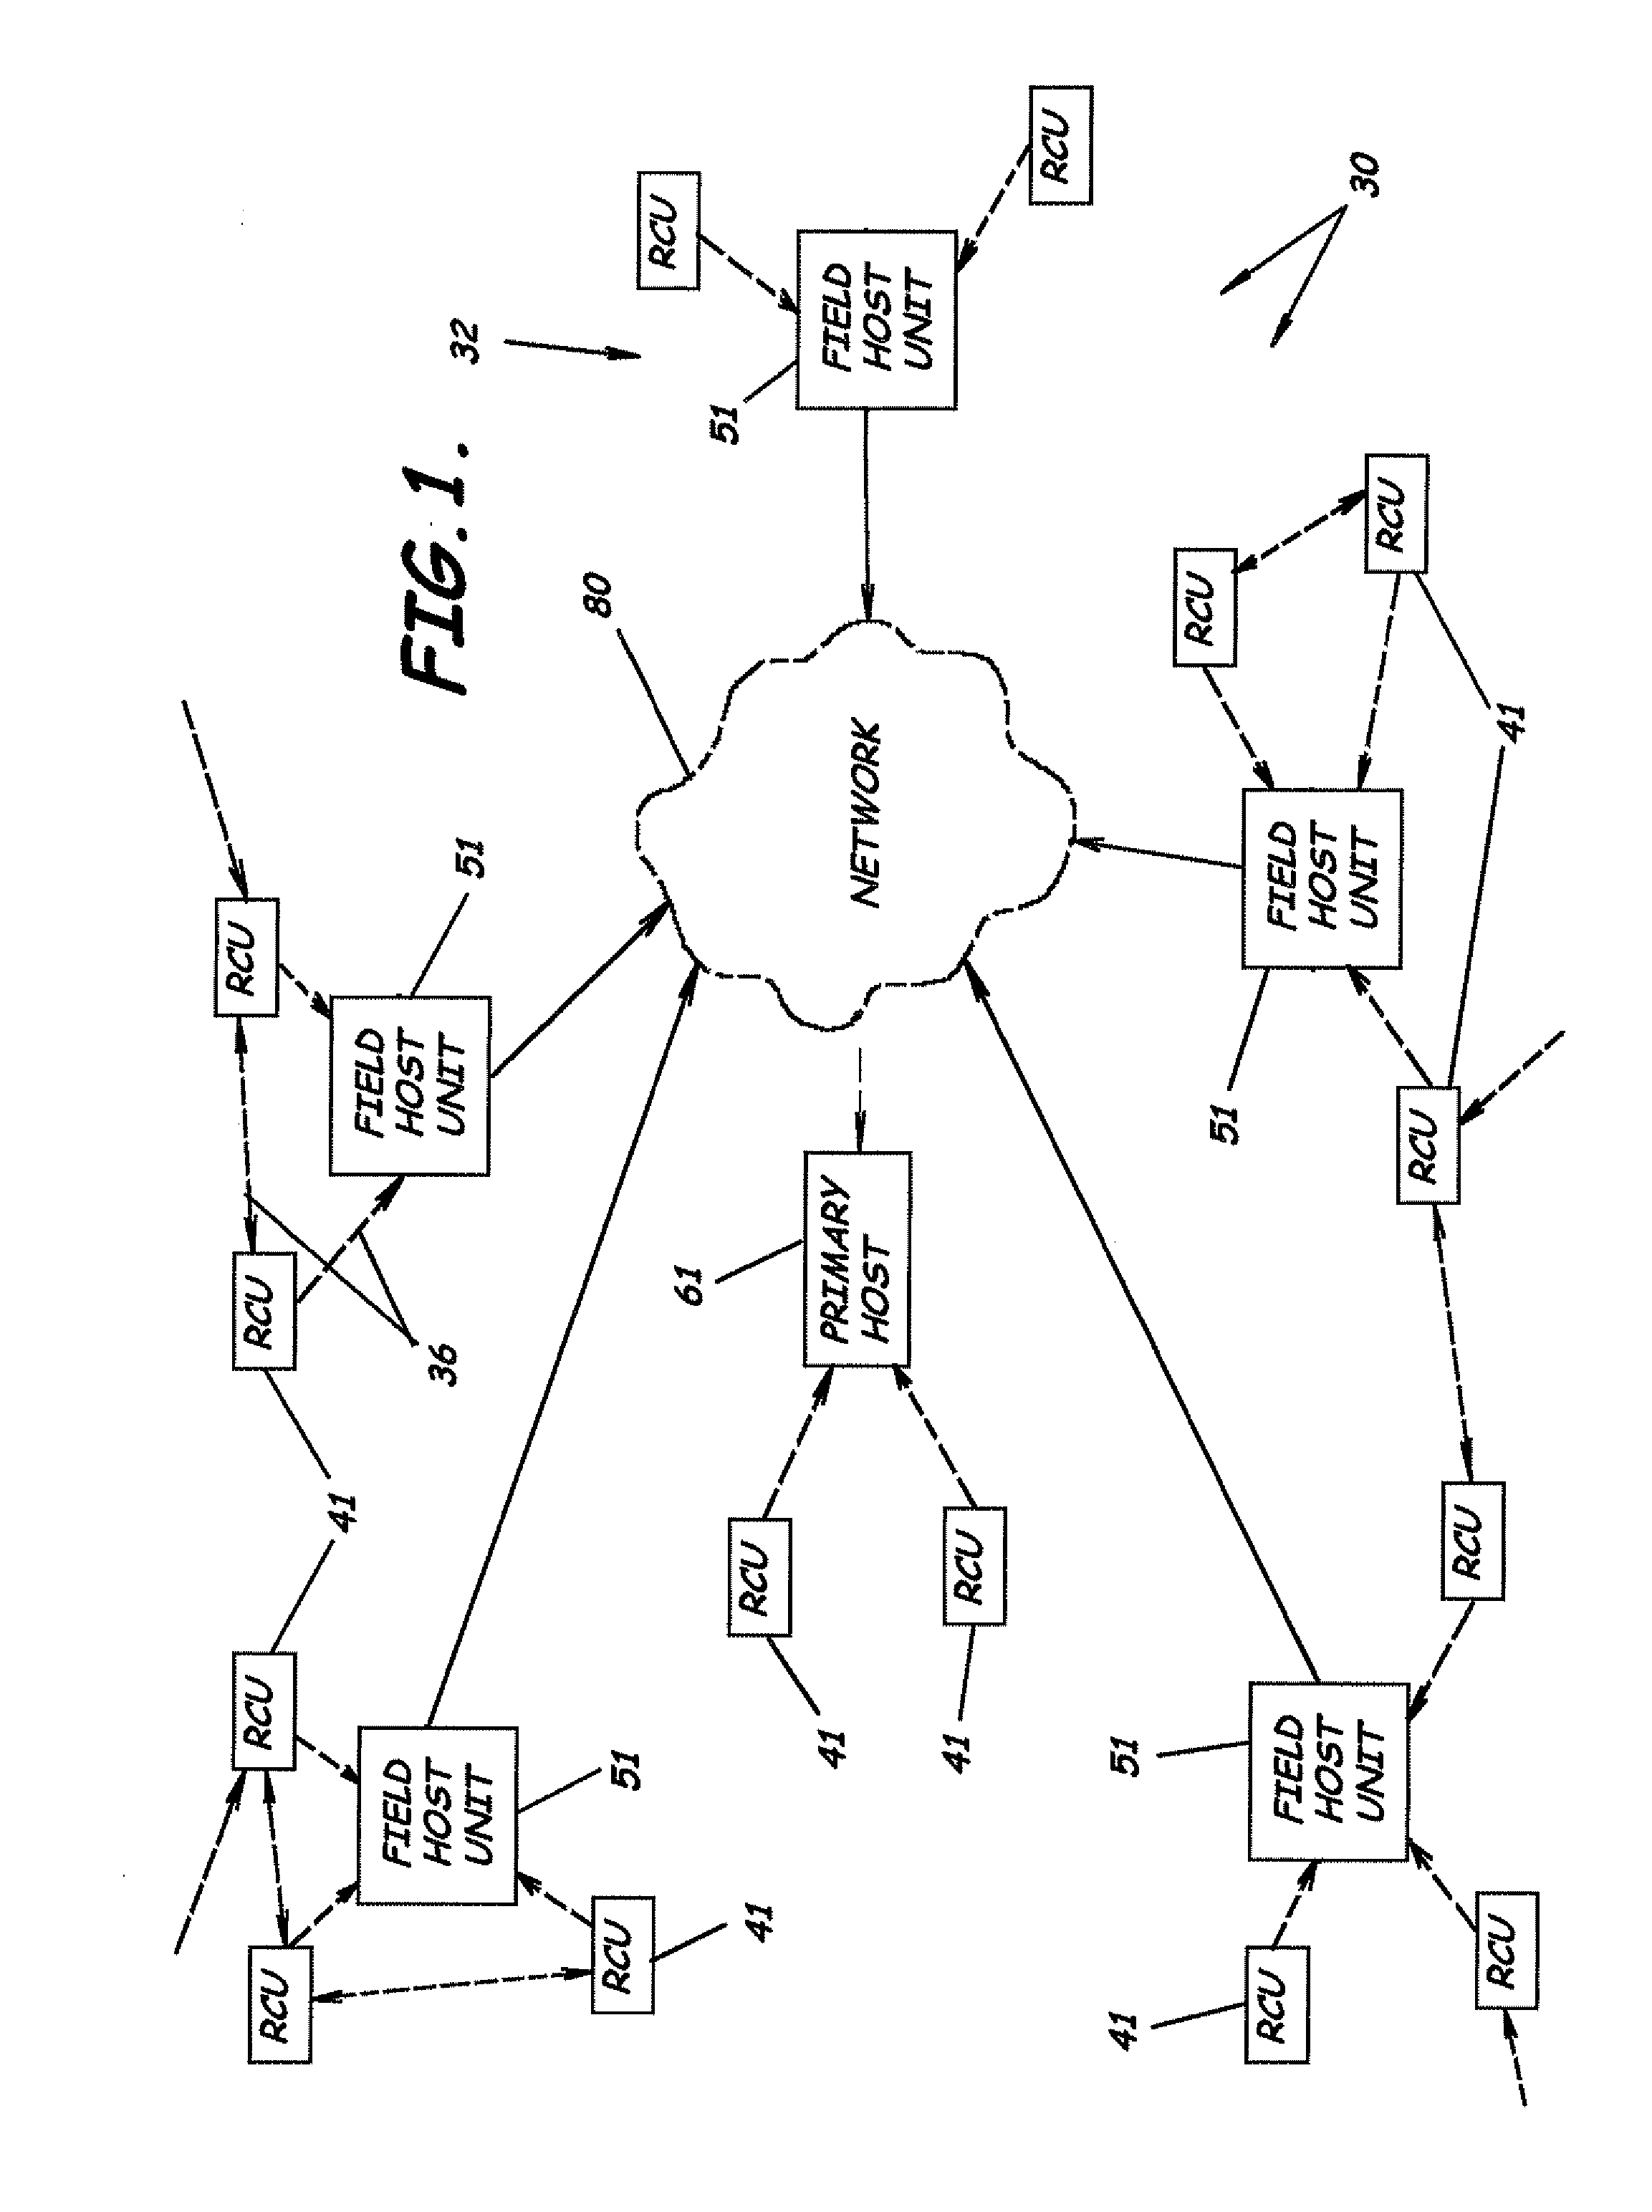 Methods of performing automated meter reading and processing meter data